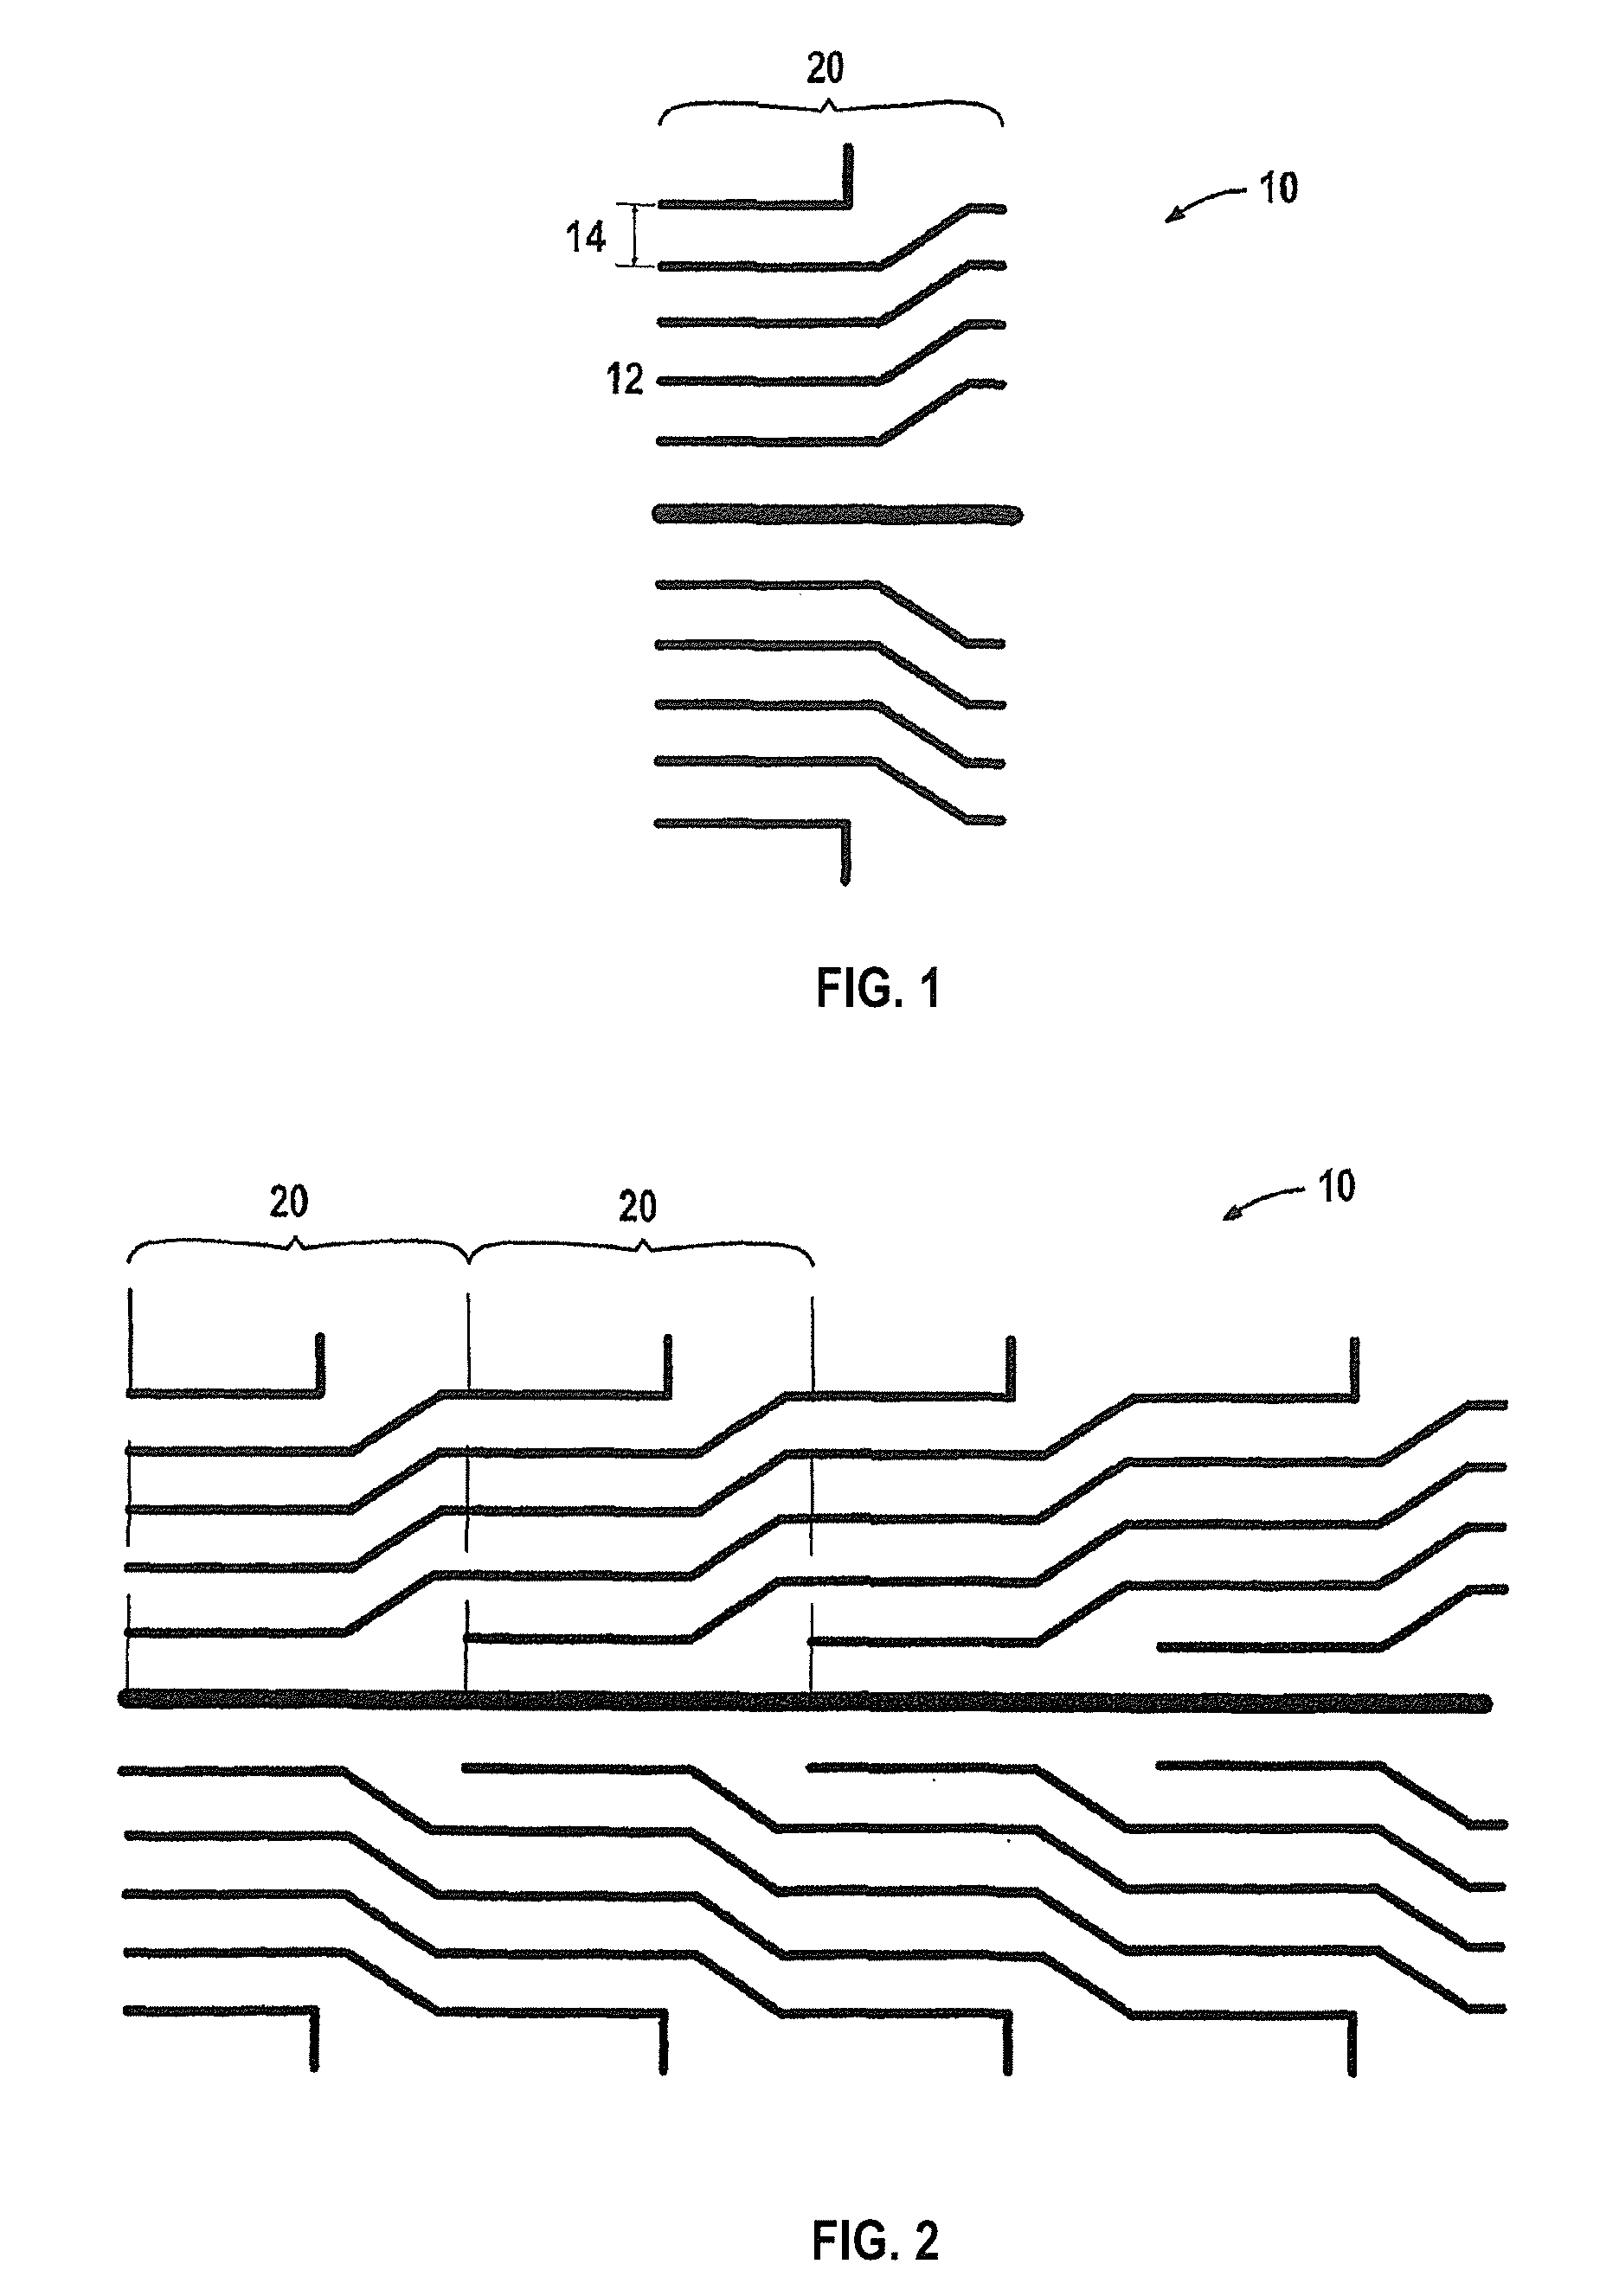 Method for manufacturing long force sensors using screen printing technology